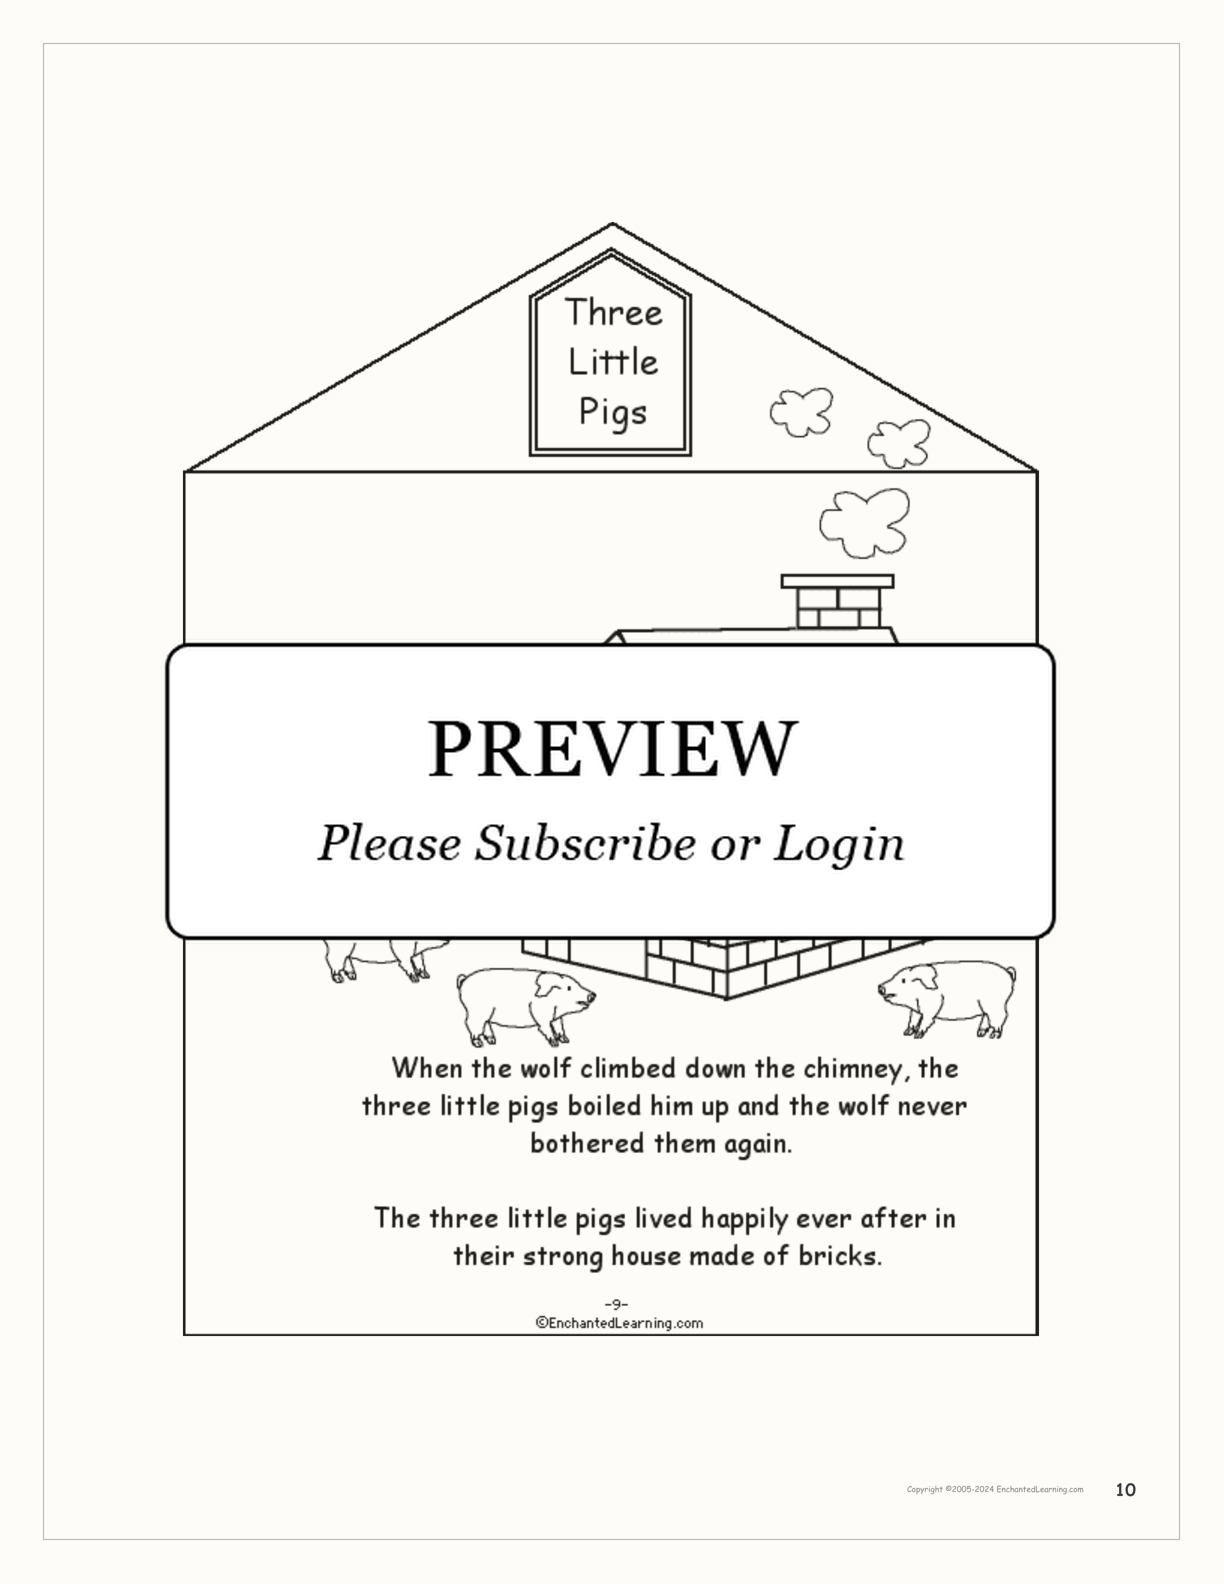 Three Little Pigs - Printable Book interactive printout page 10